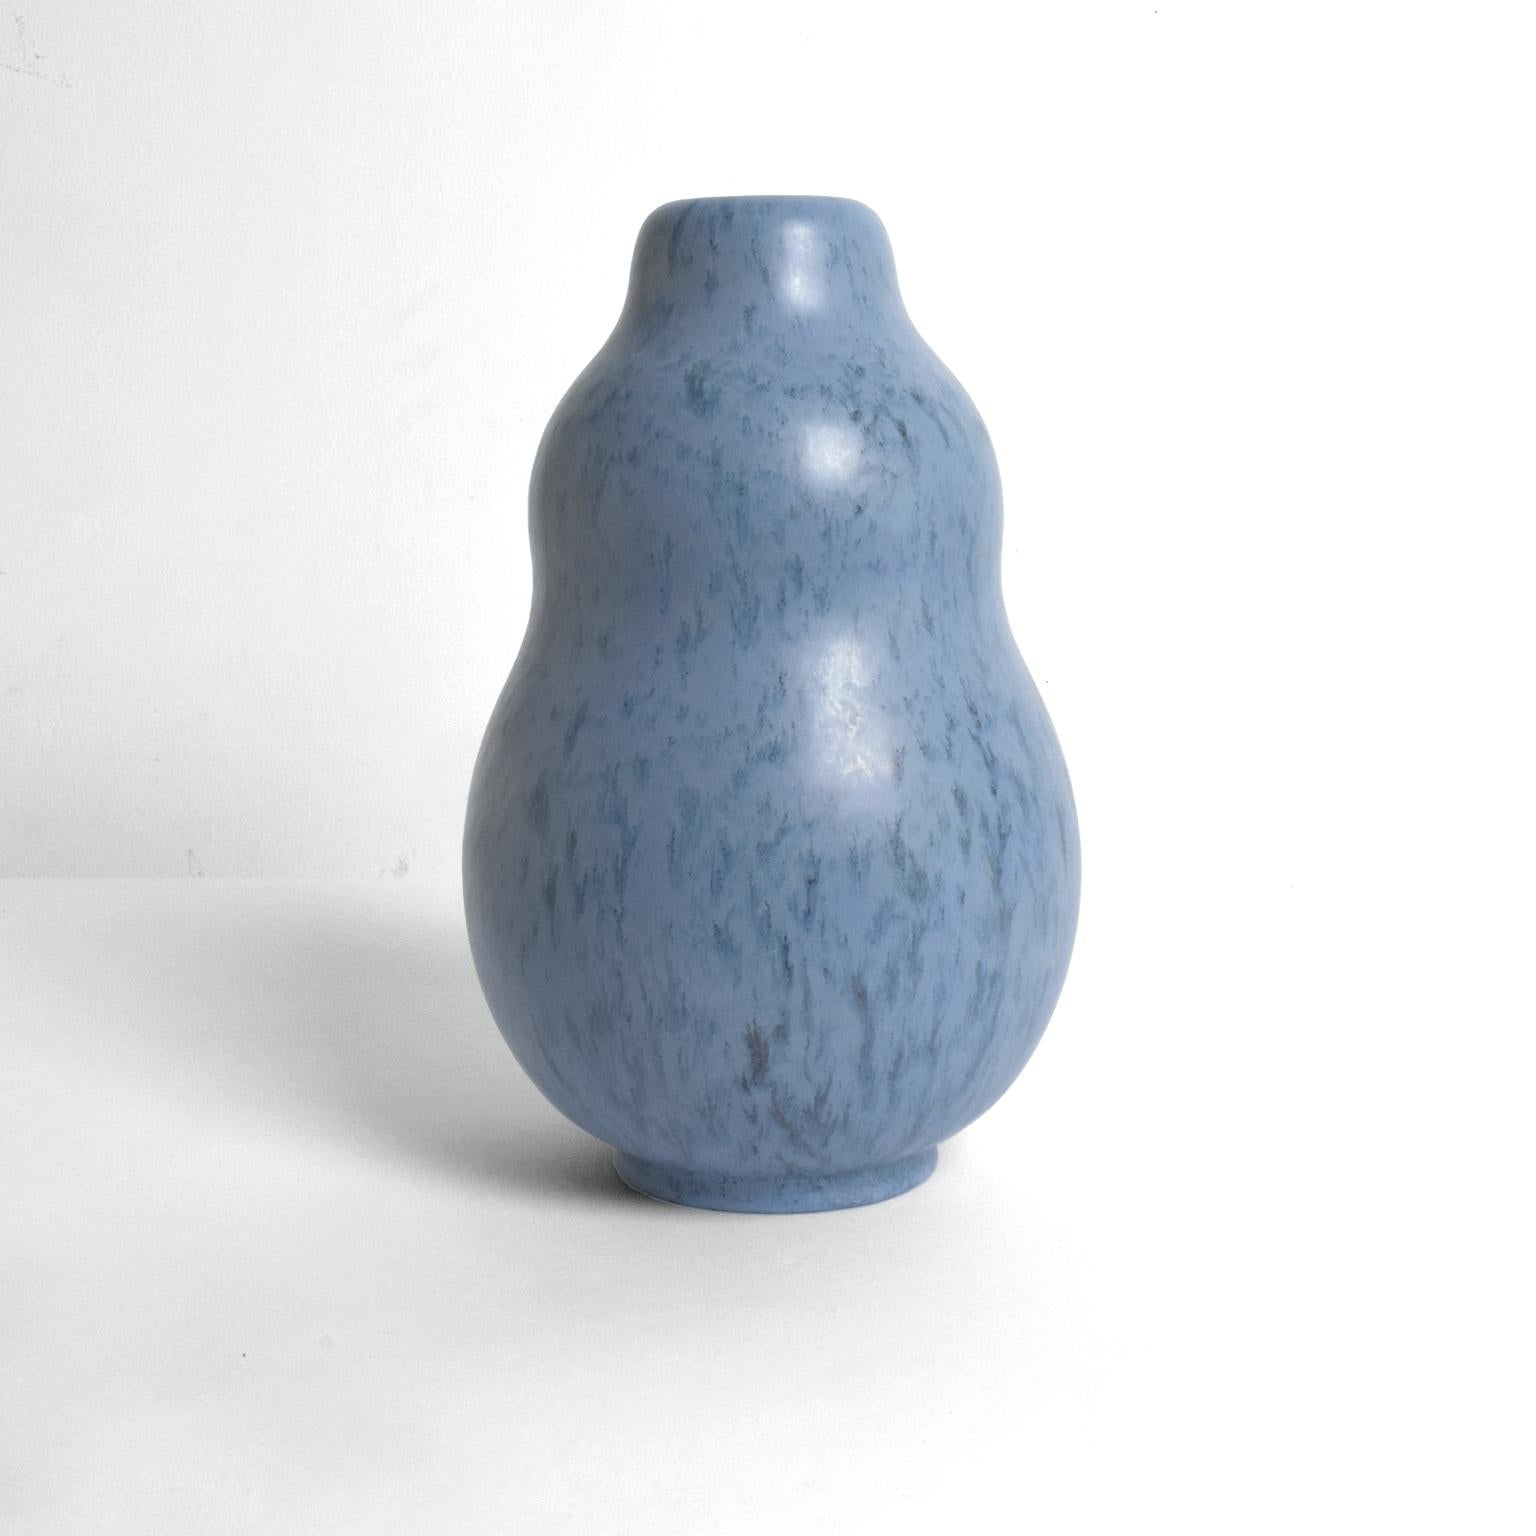 Scandinavian Modern ceramic vase designed by Vicke Lindstrand for Upsala Ekeby, Sweden, circa 1940’s. The vase’s soft organic form is highlighted by a beautiful mottled glaze. 

Measures: height 10” diameter: 7”.